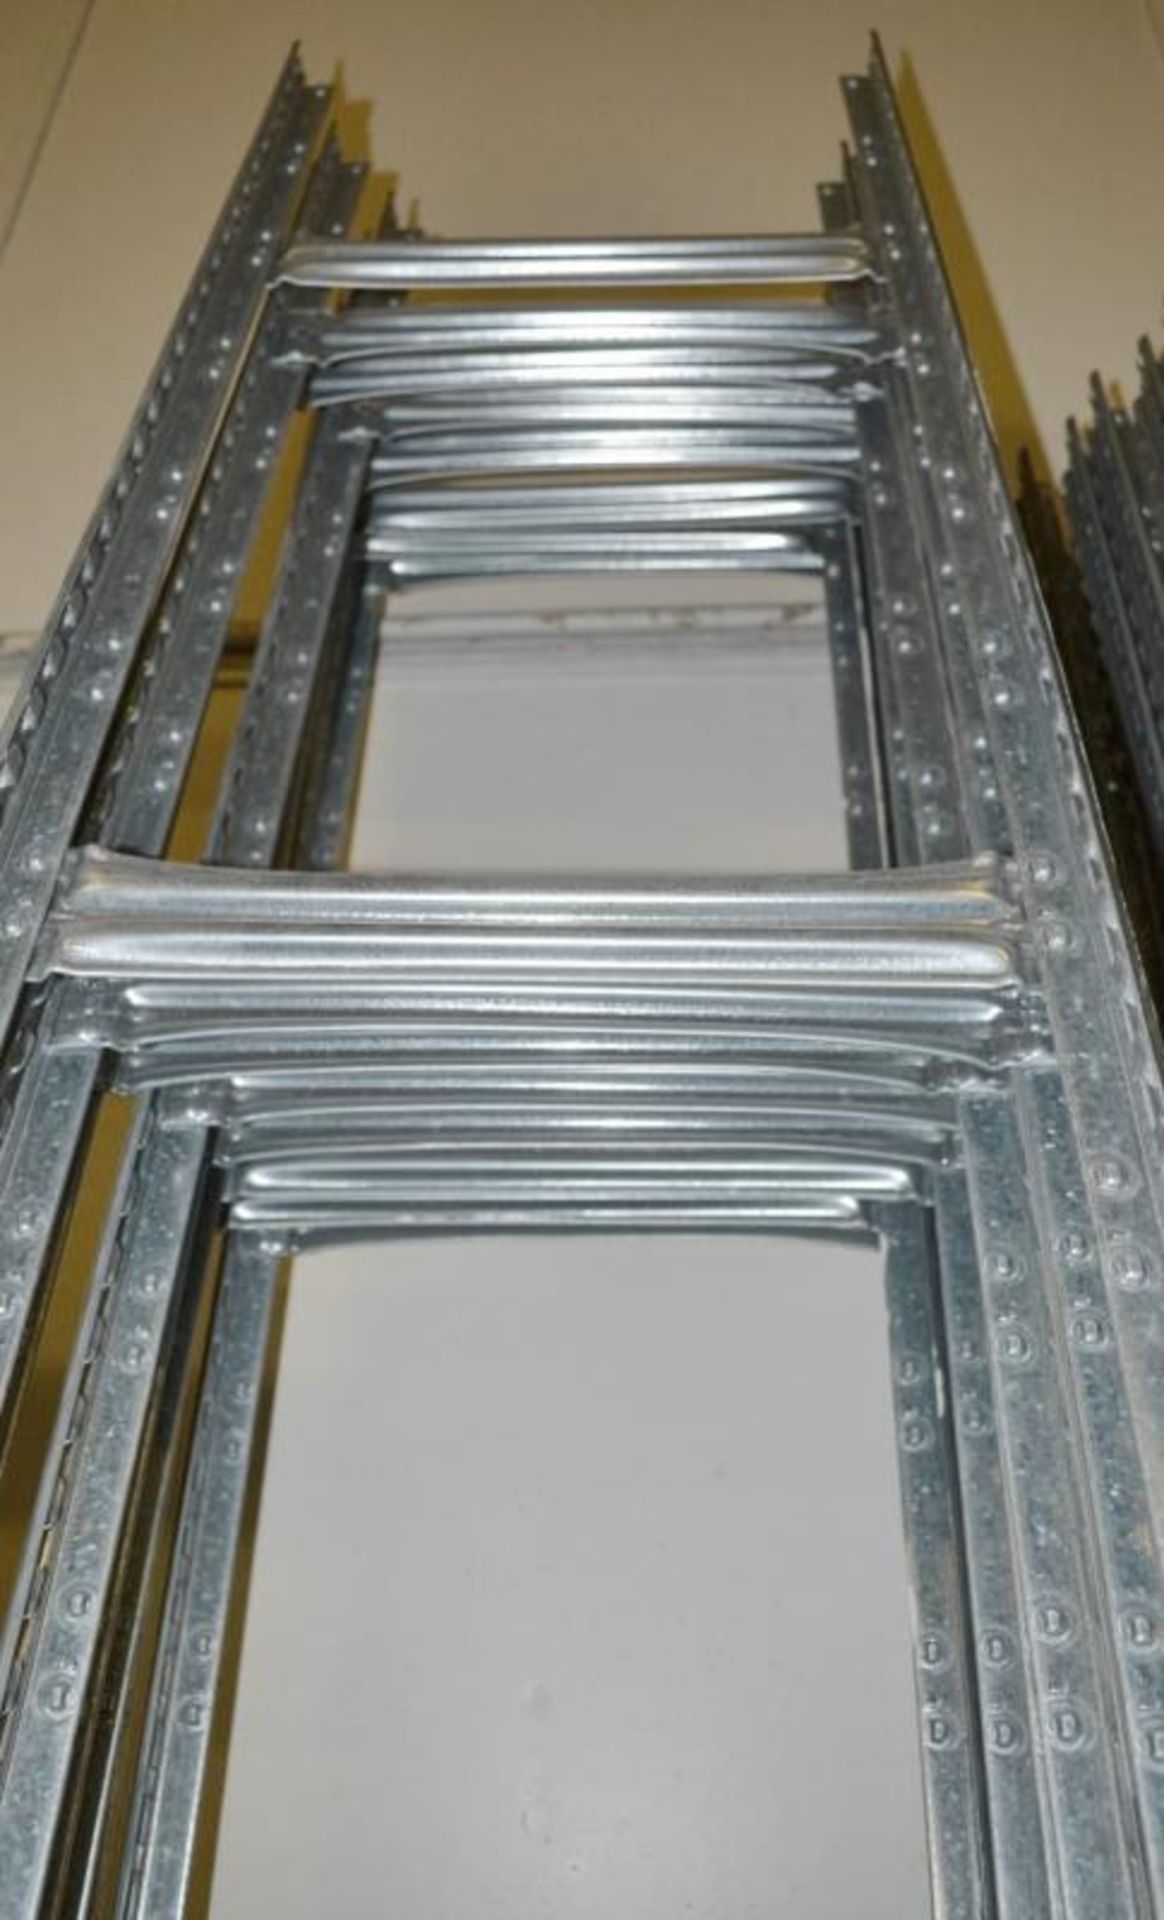 4 x Bays of Metalsistem Steel Modular Storage Shelving - Includes 29 Pieces - Recently Removed - Image 14 of 17